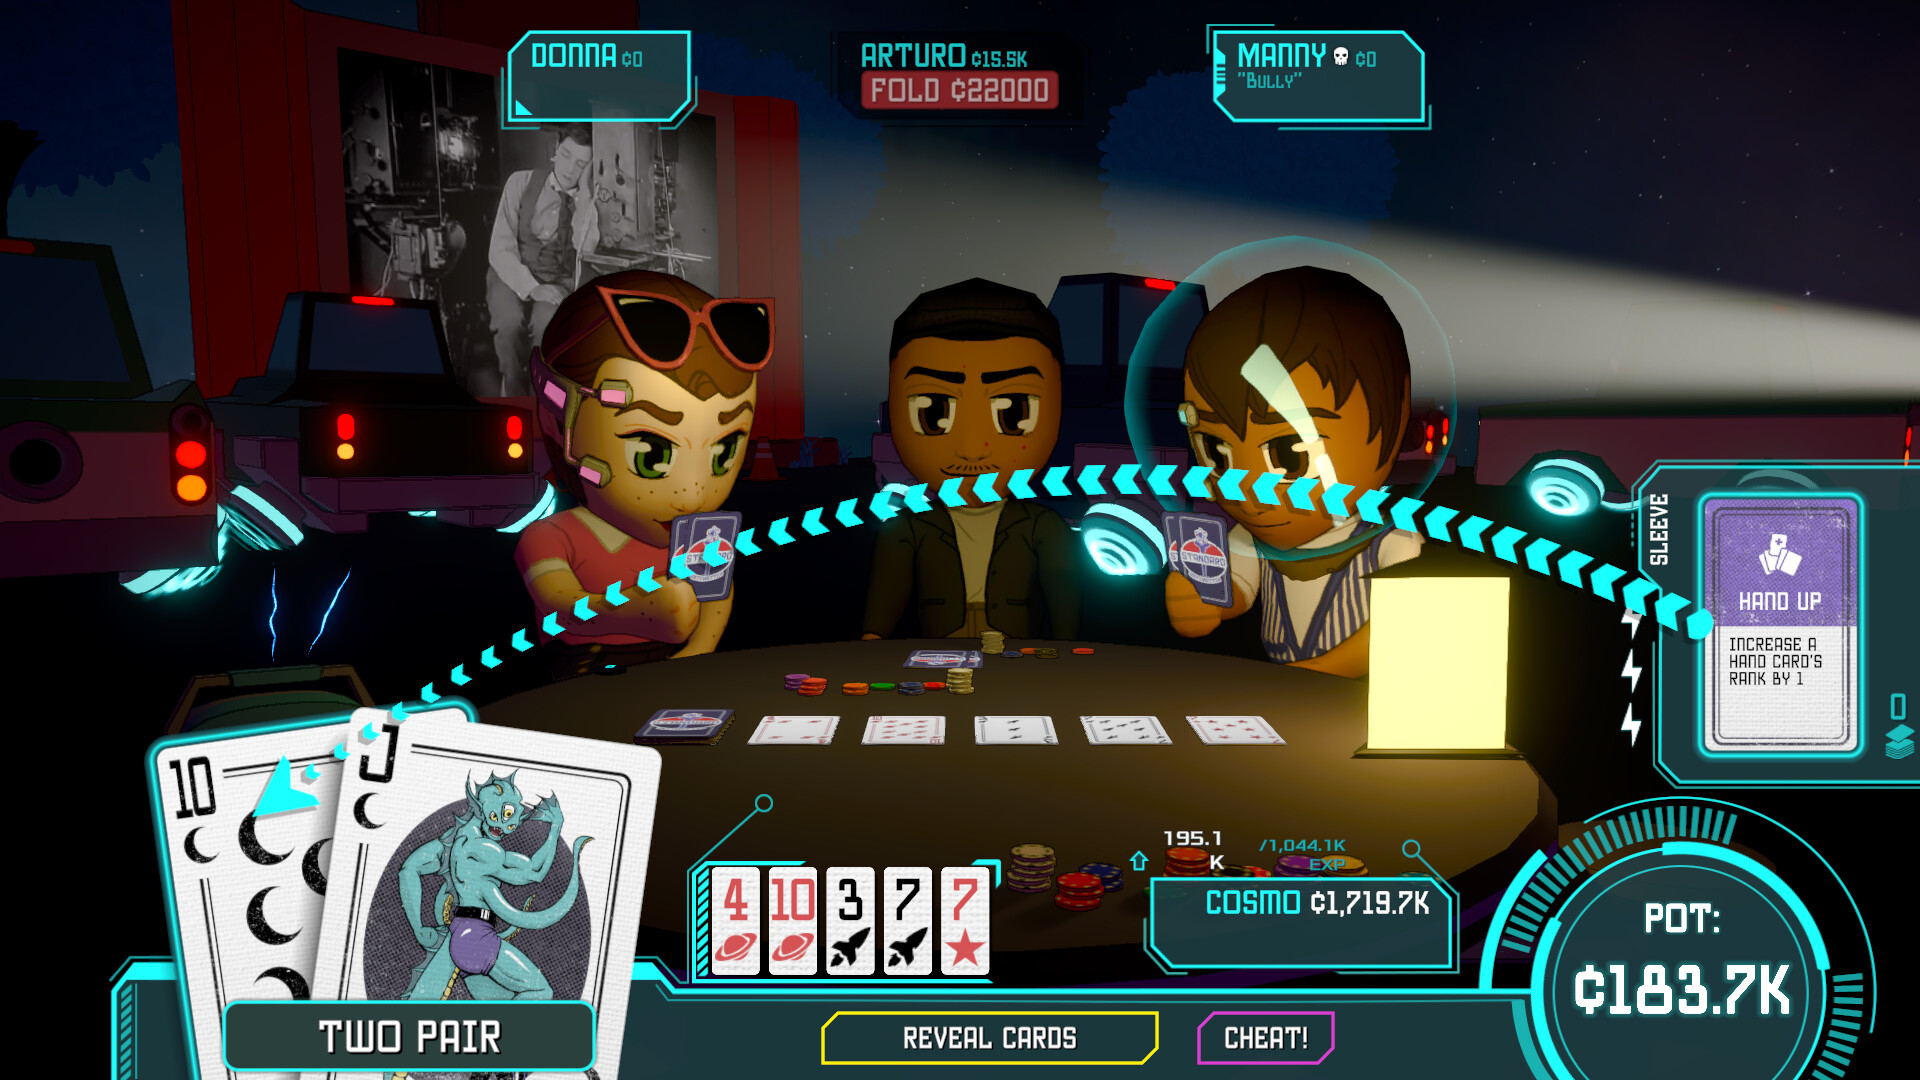 Cosmo Cheats at Poker Steam CD Key, $5.54